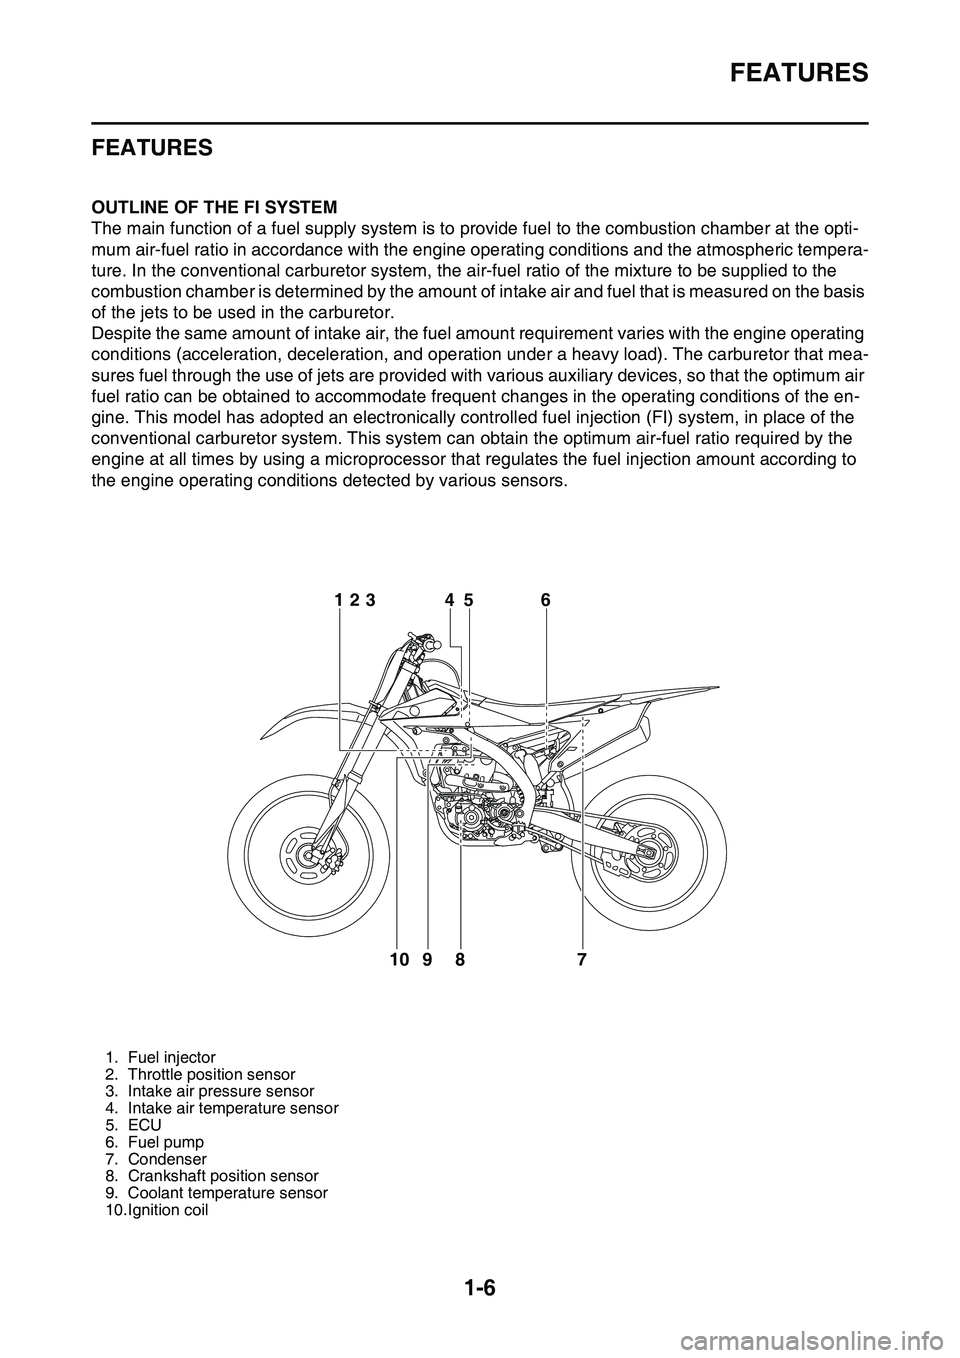 YAMAHA YZ450F 2014  Owners Manual FEATURES
1-6
EAS20170
FEATURES
EAS1SL1014OUTLINE OF THE FI SYSTEM
The main function of a fuel supply system is to provide fuel to the combustion chamber at the opti-
mum air-fuel ratio in accordance w